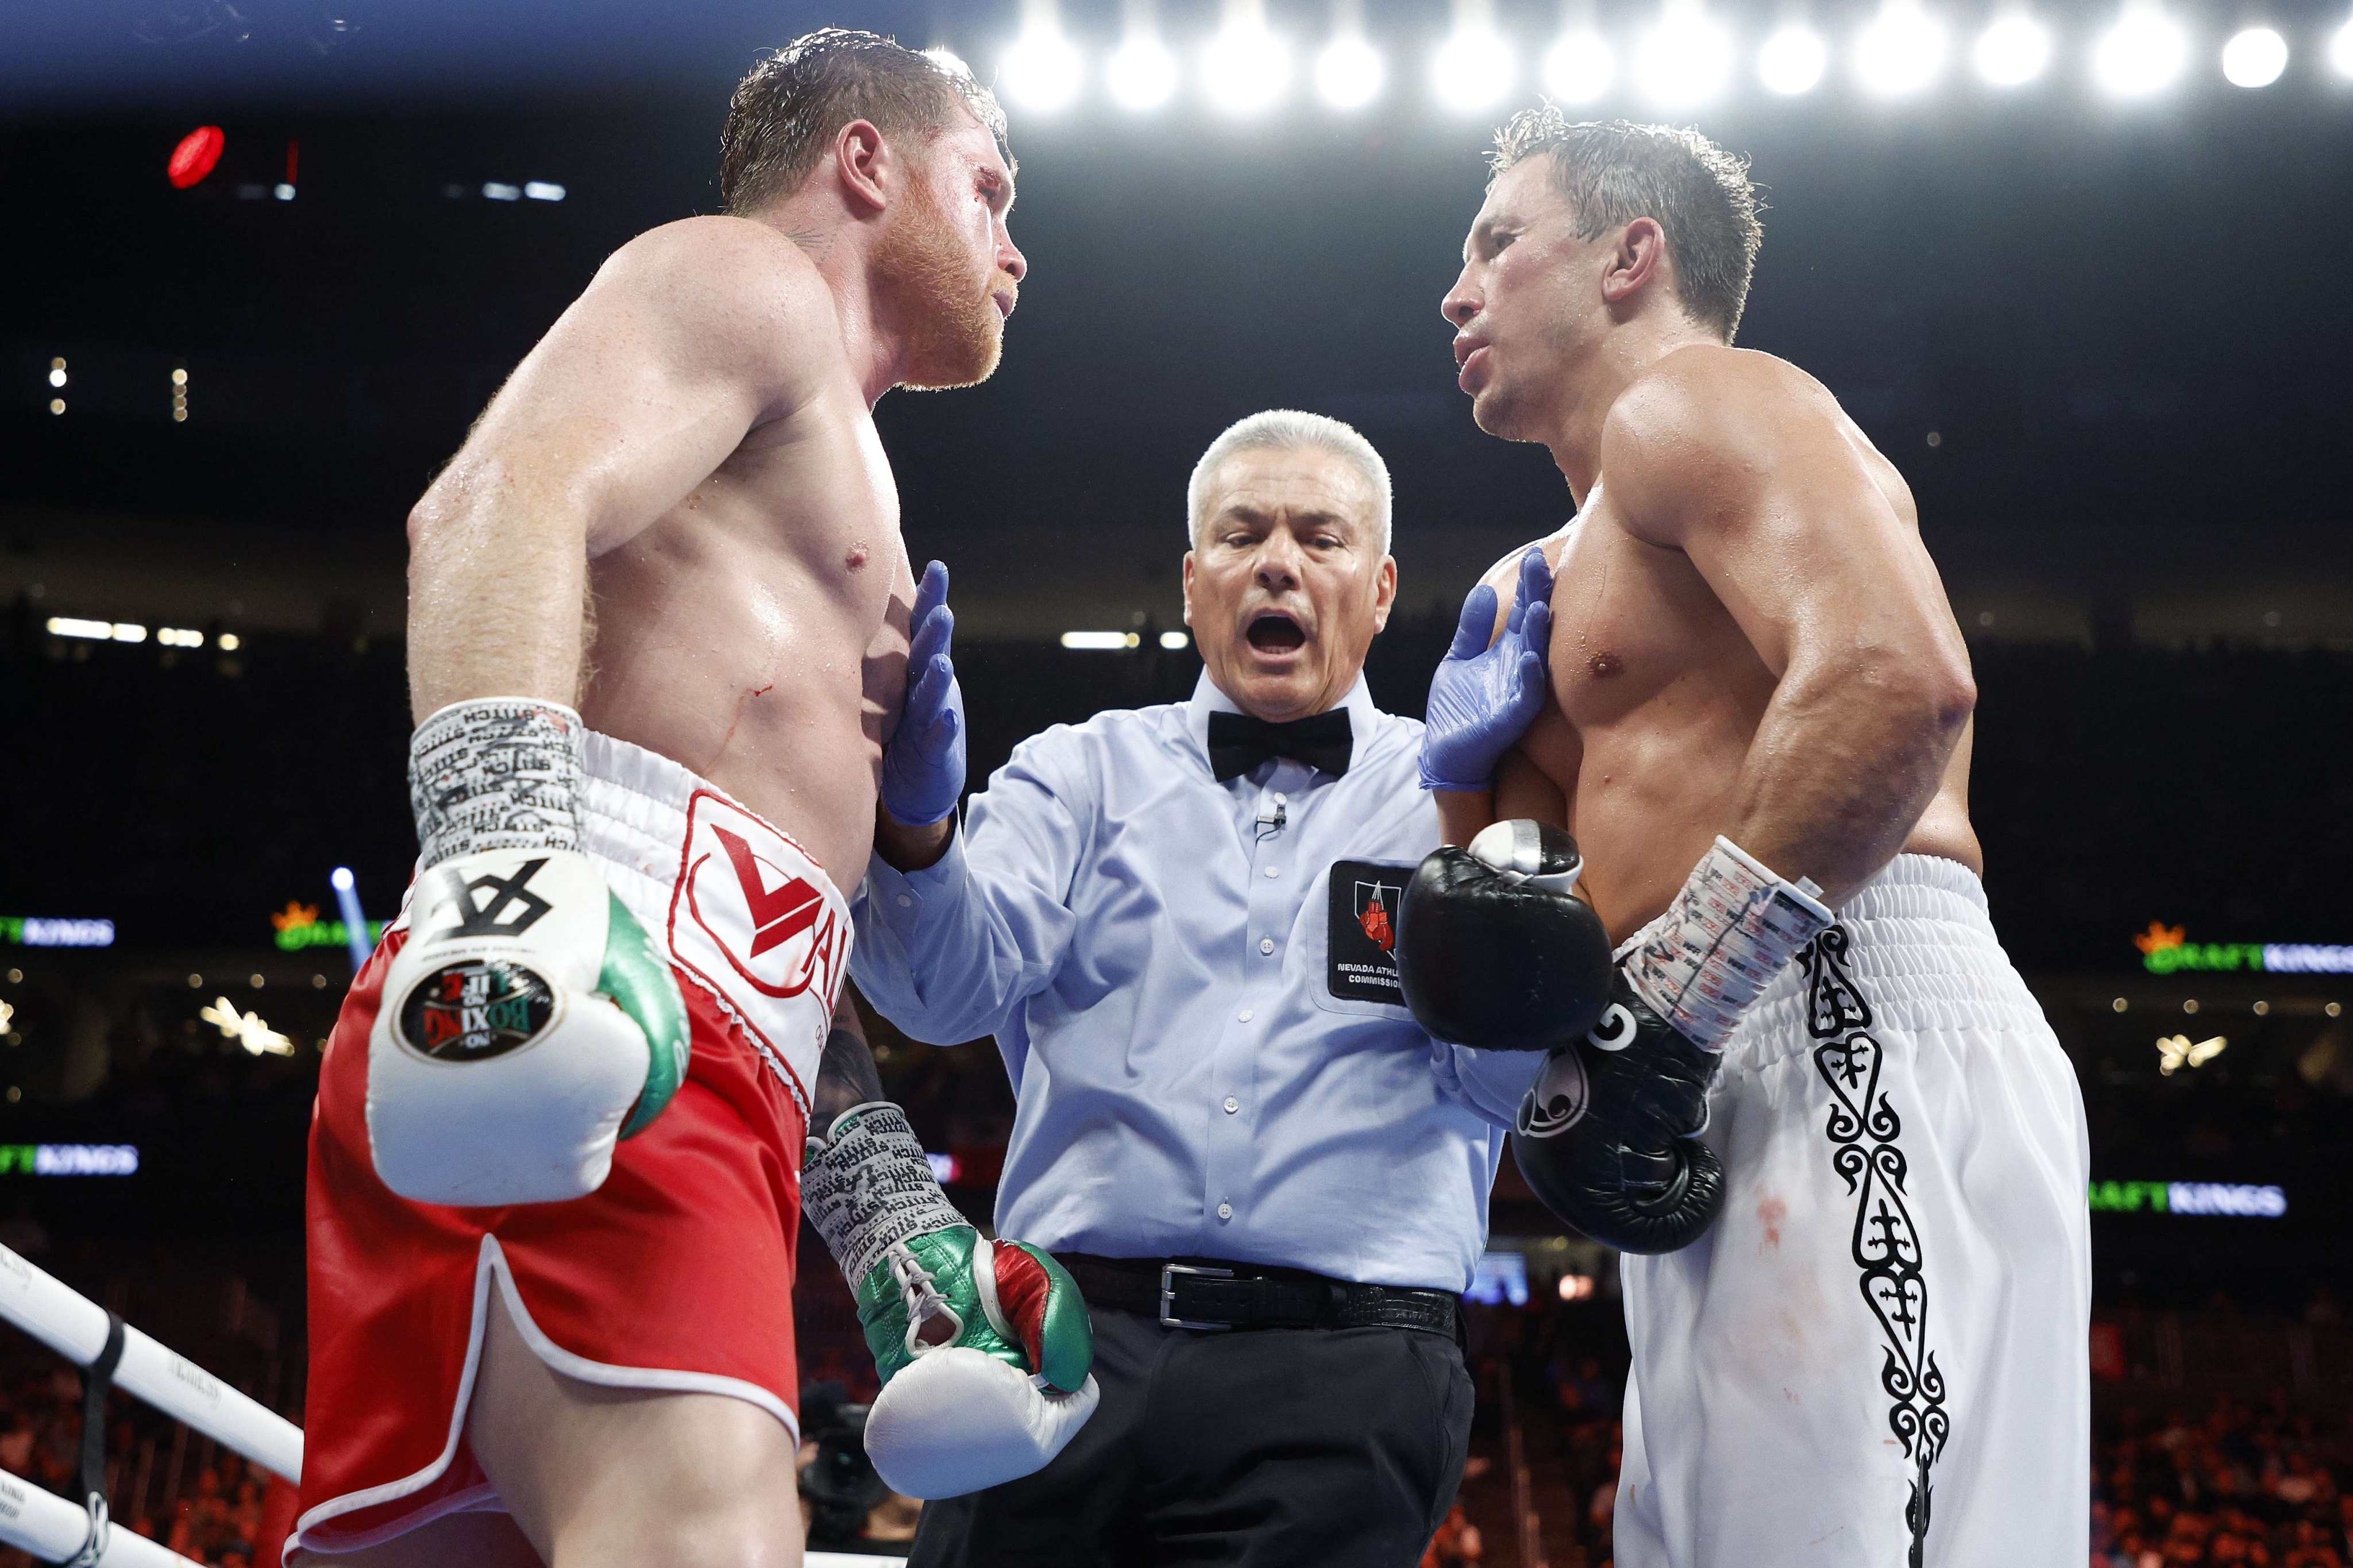 Canelo Alvarez (red trunks) and Gennadiy Golovkin (white trunks) square off following the eleventh round in Las Vegas. Photo: AFP